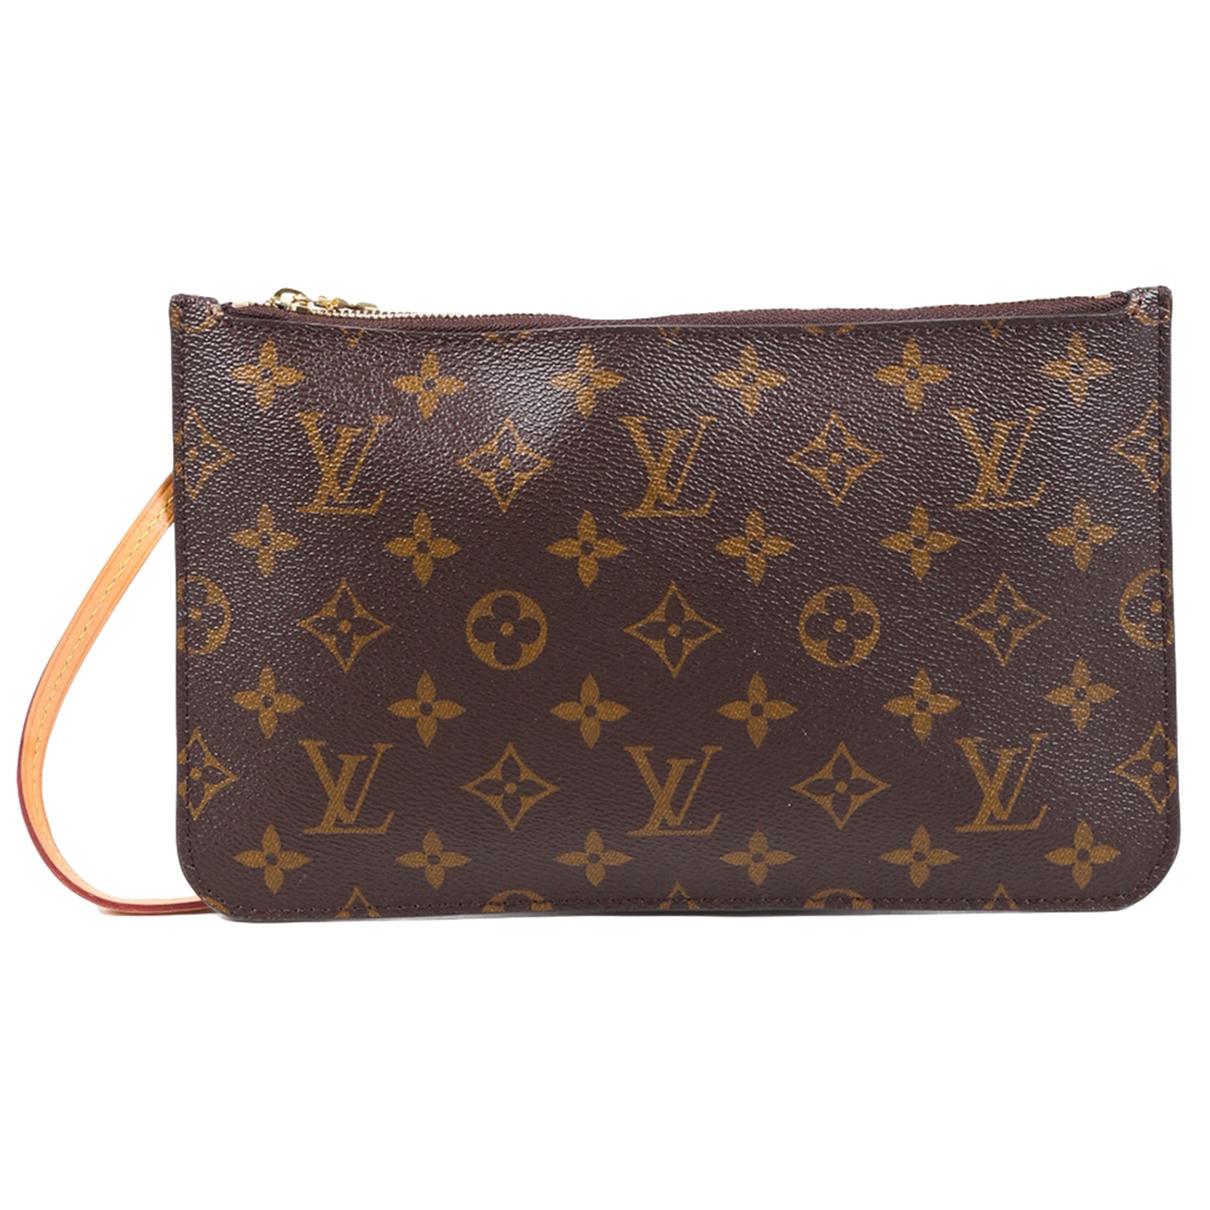 Louis Vuitton Neverfull Cloth Clutch Bag in Brown - Lyst